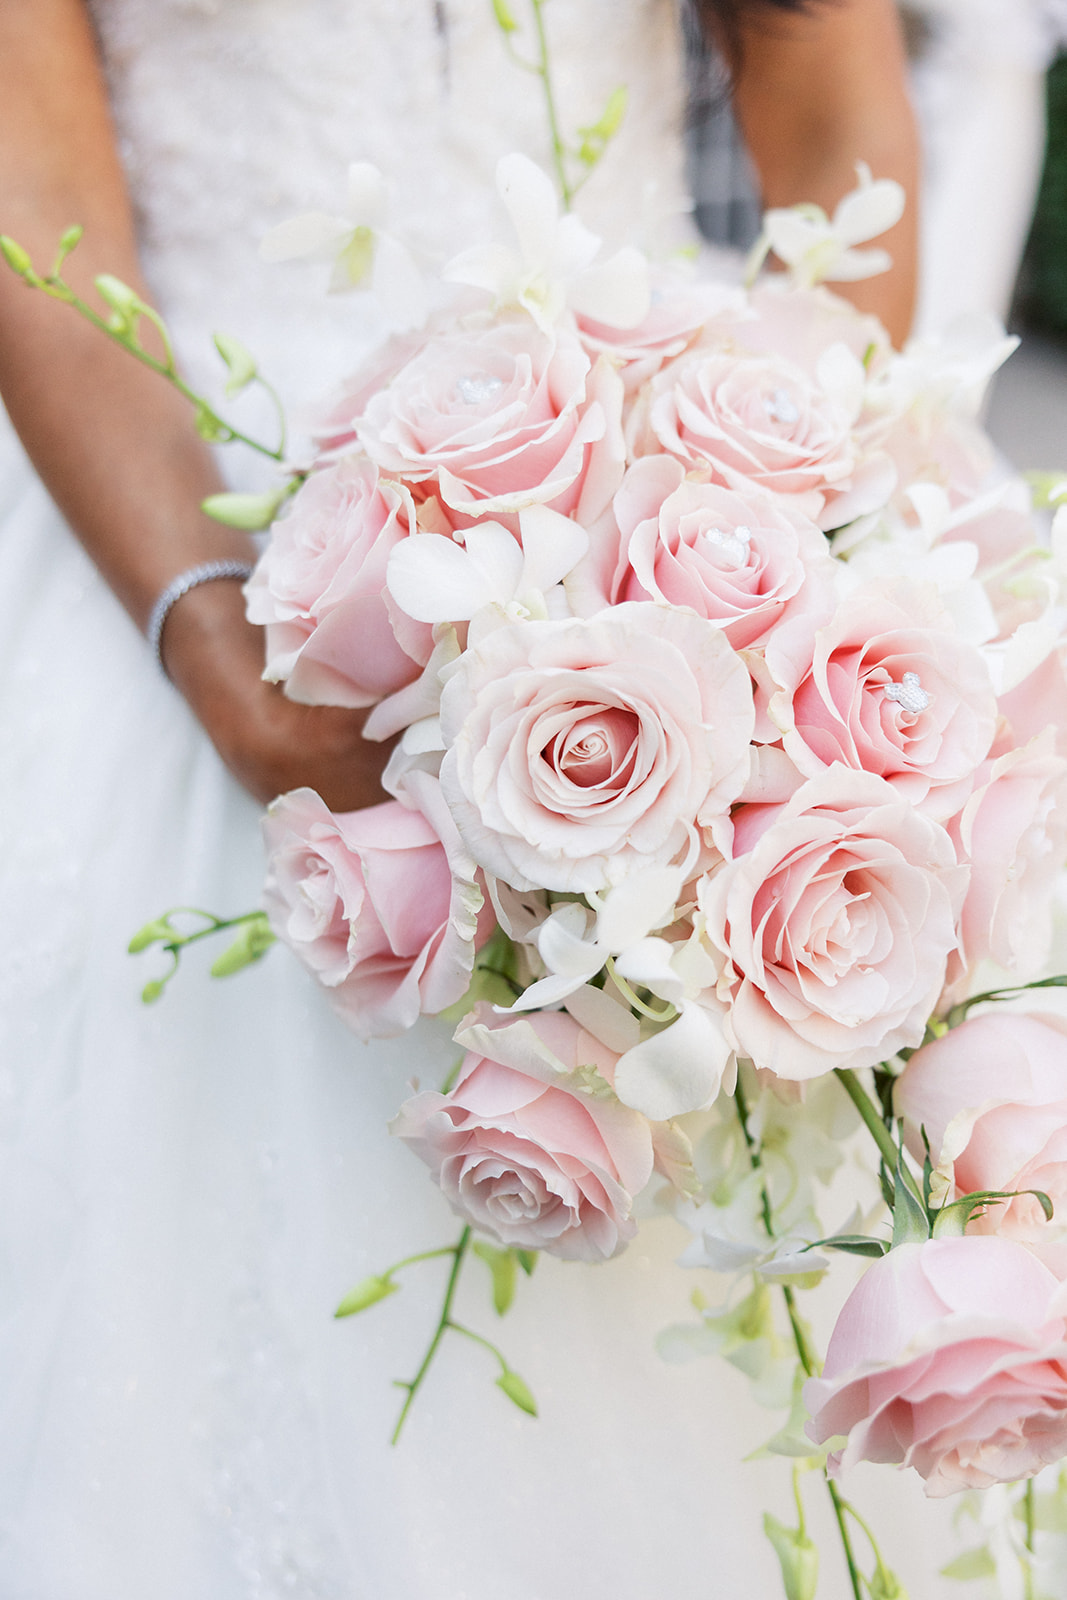 Details of a bride's pink flower bouquet as she holds it